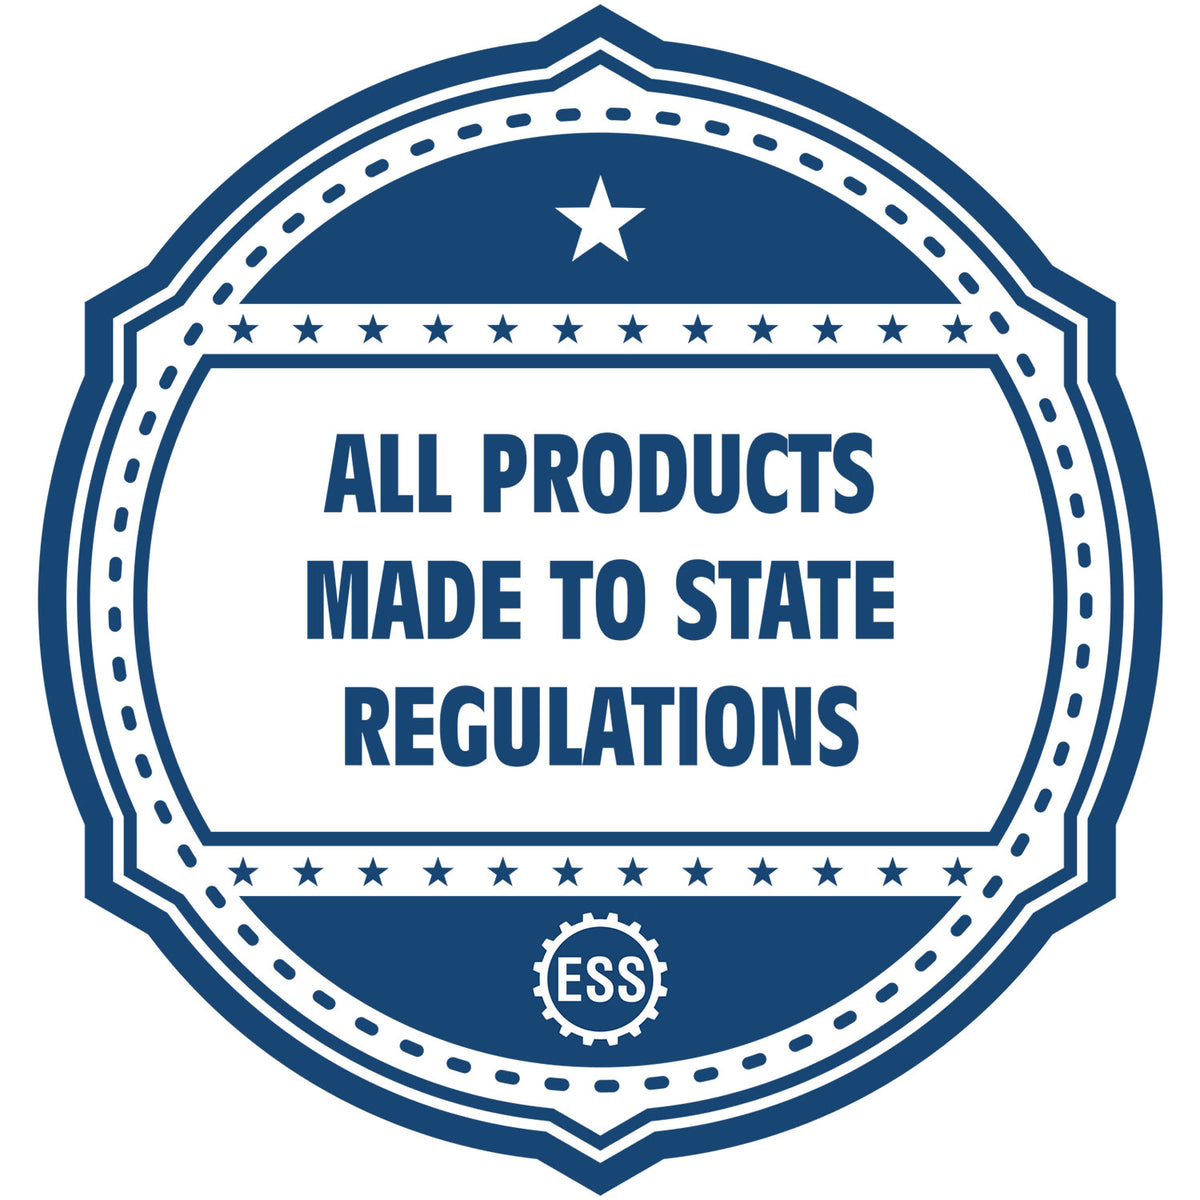 A blue icon or badge for the Hybrid Massachusetts Landscape Architect Seal showing that this product is made in compliance with state regulations.